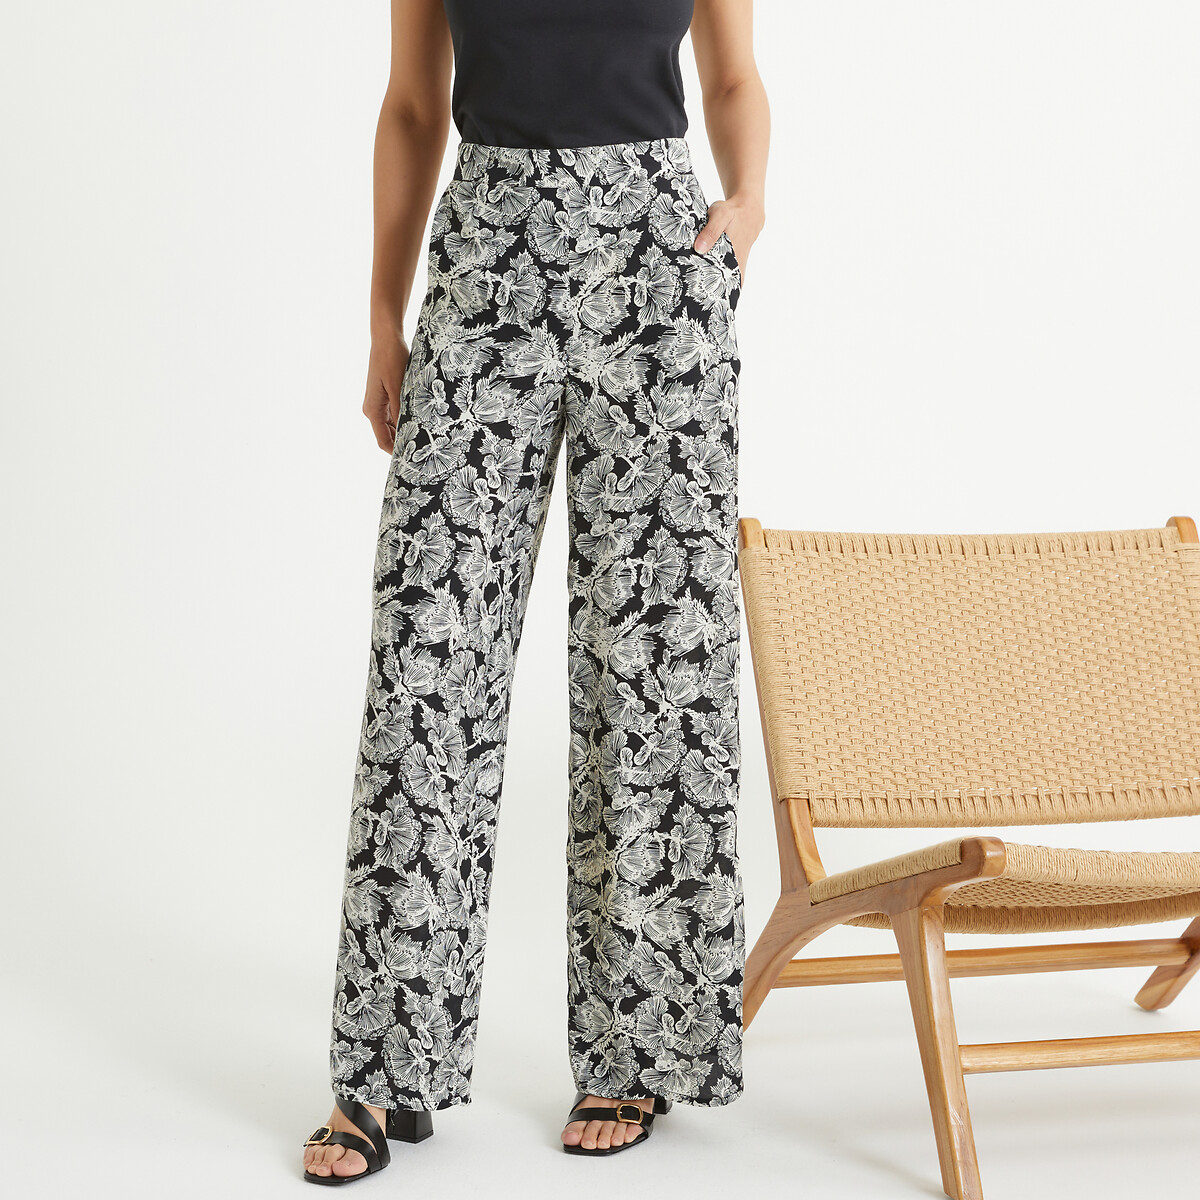 Image of Floral Wide Leg Trousers, Length 31.5"